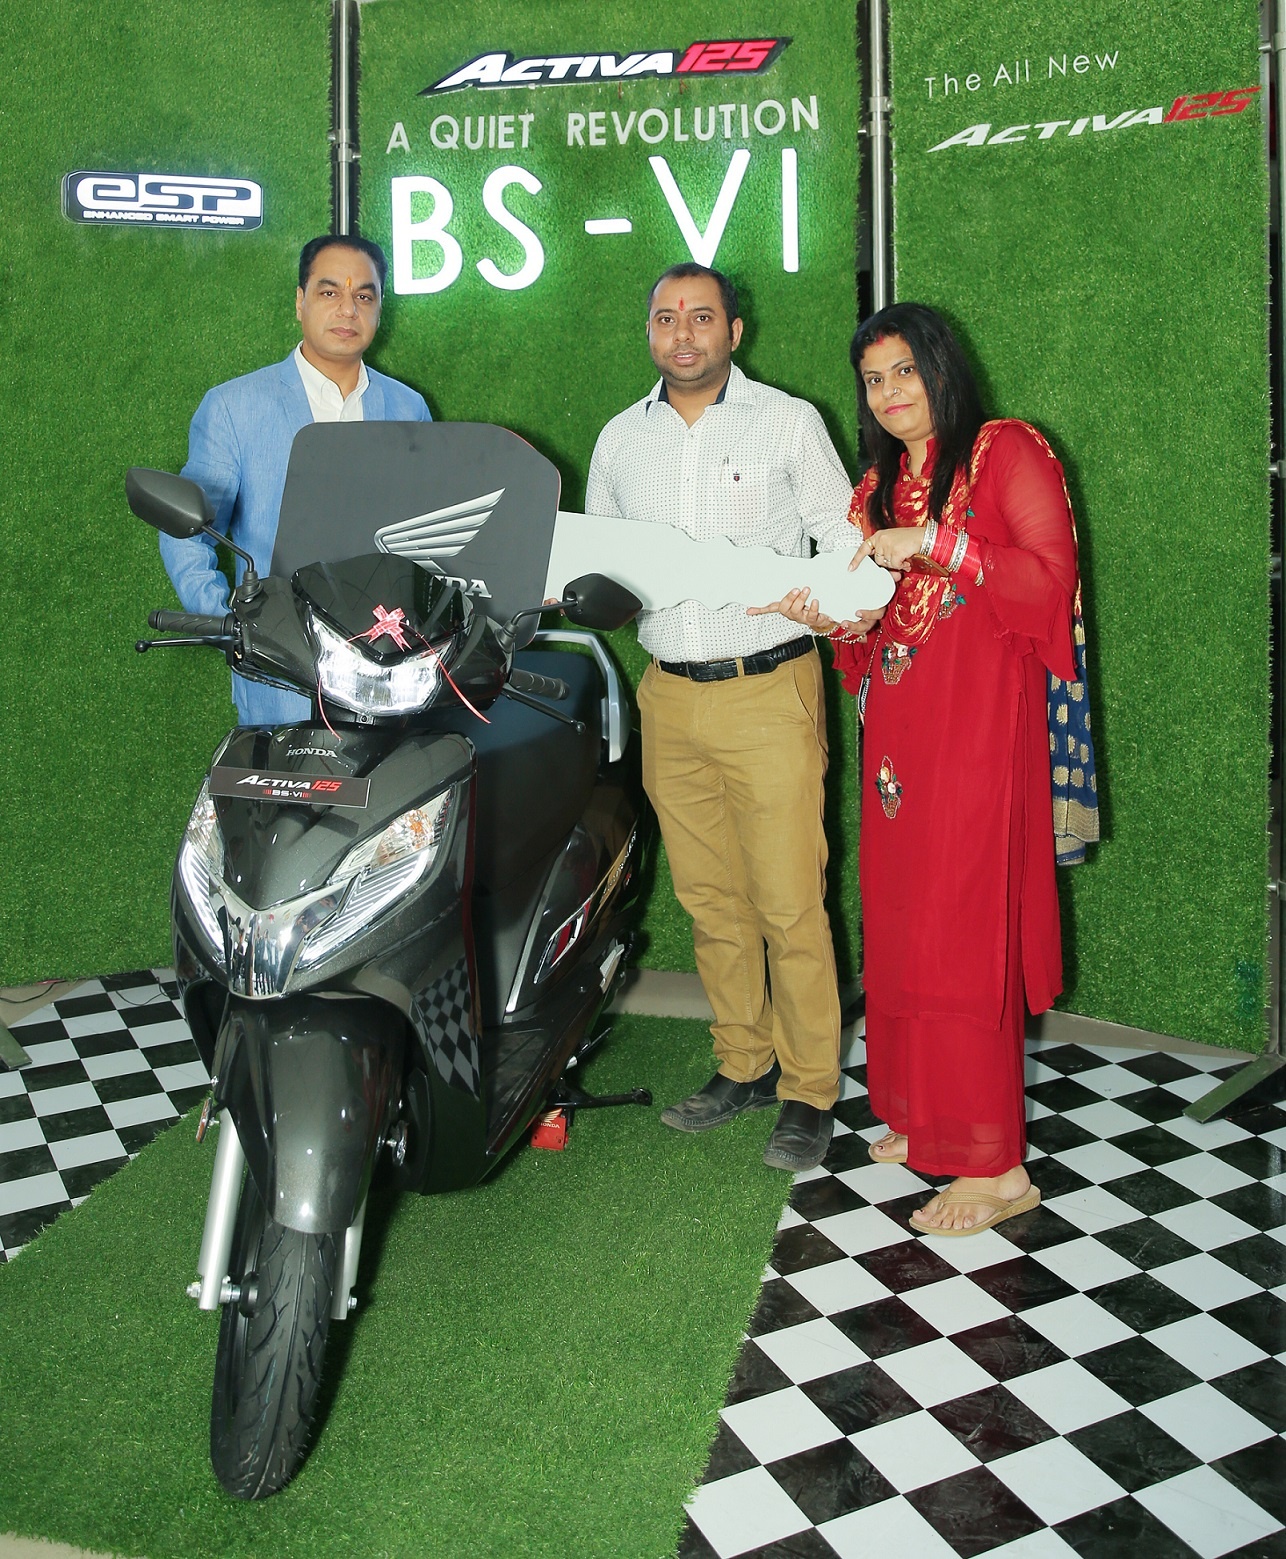 india-celebrates-this-festival-with-a-quiet-revolution-commences-all-india-deliveries-of-activa-125-bsvi